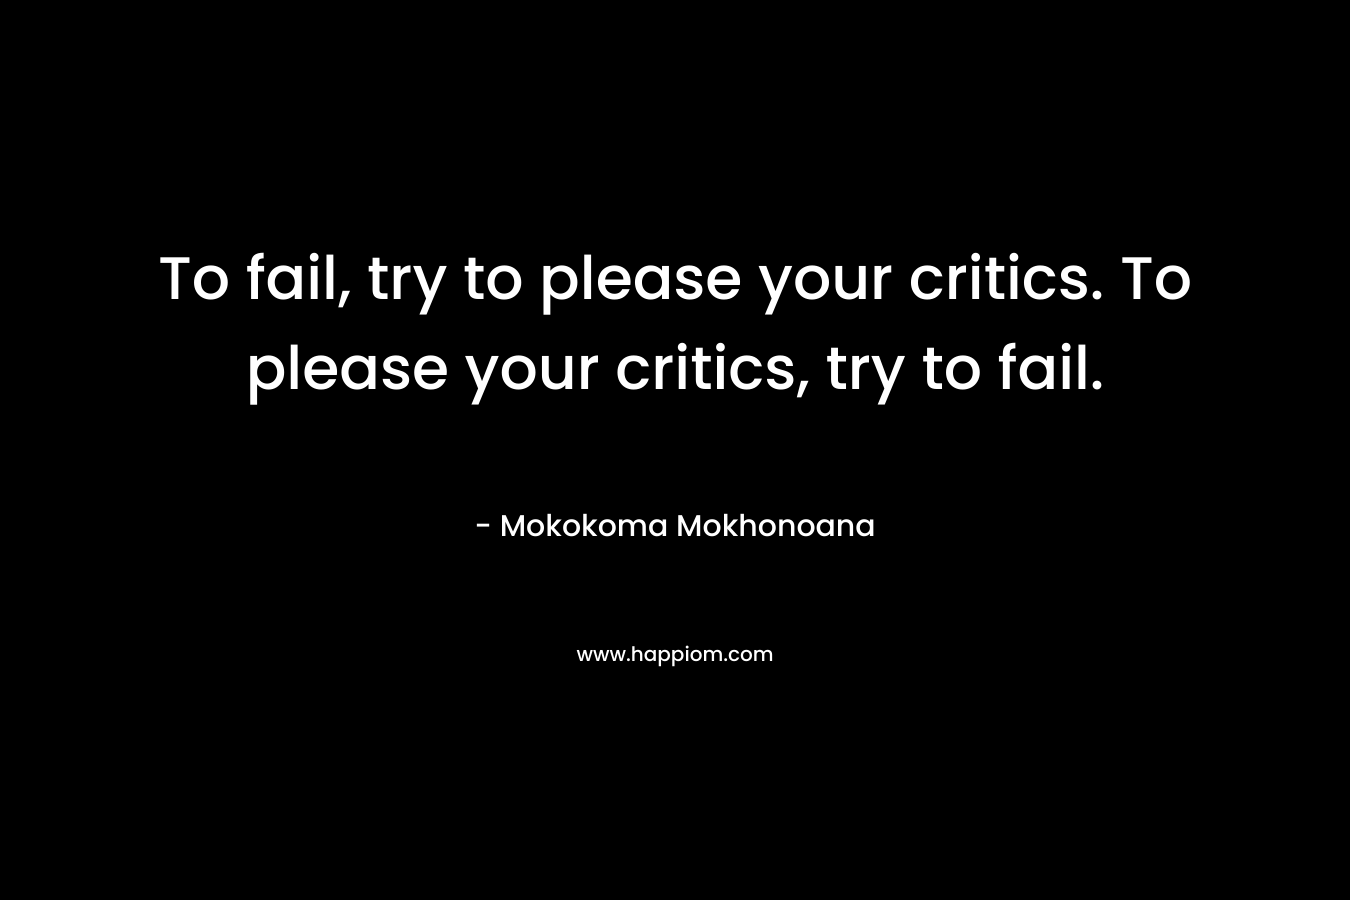 To fail, try to please your critics. To please your critics, try to fail.